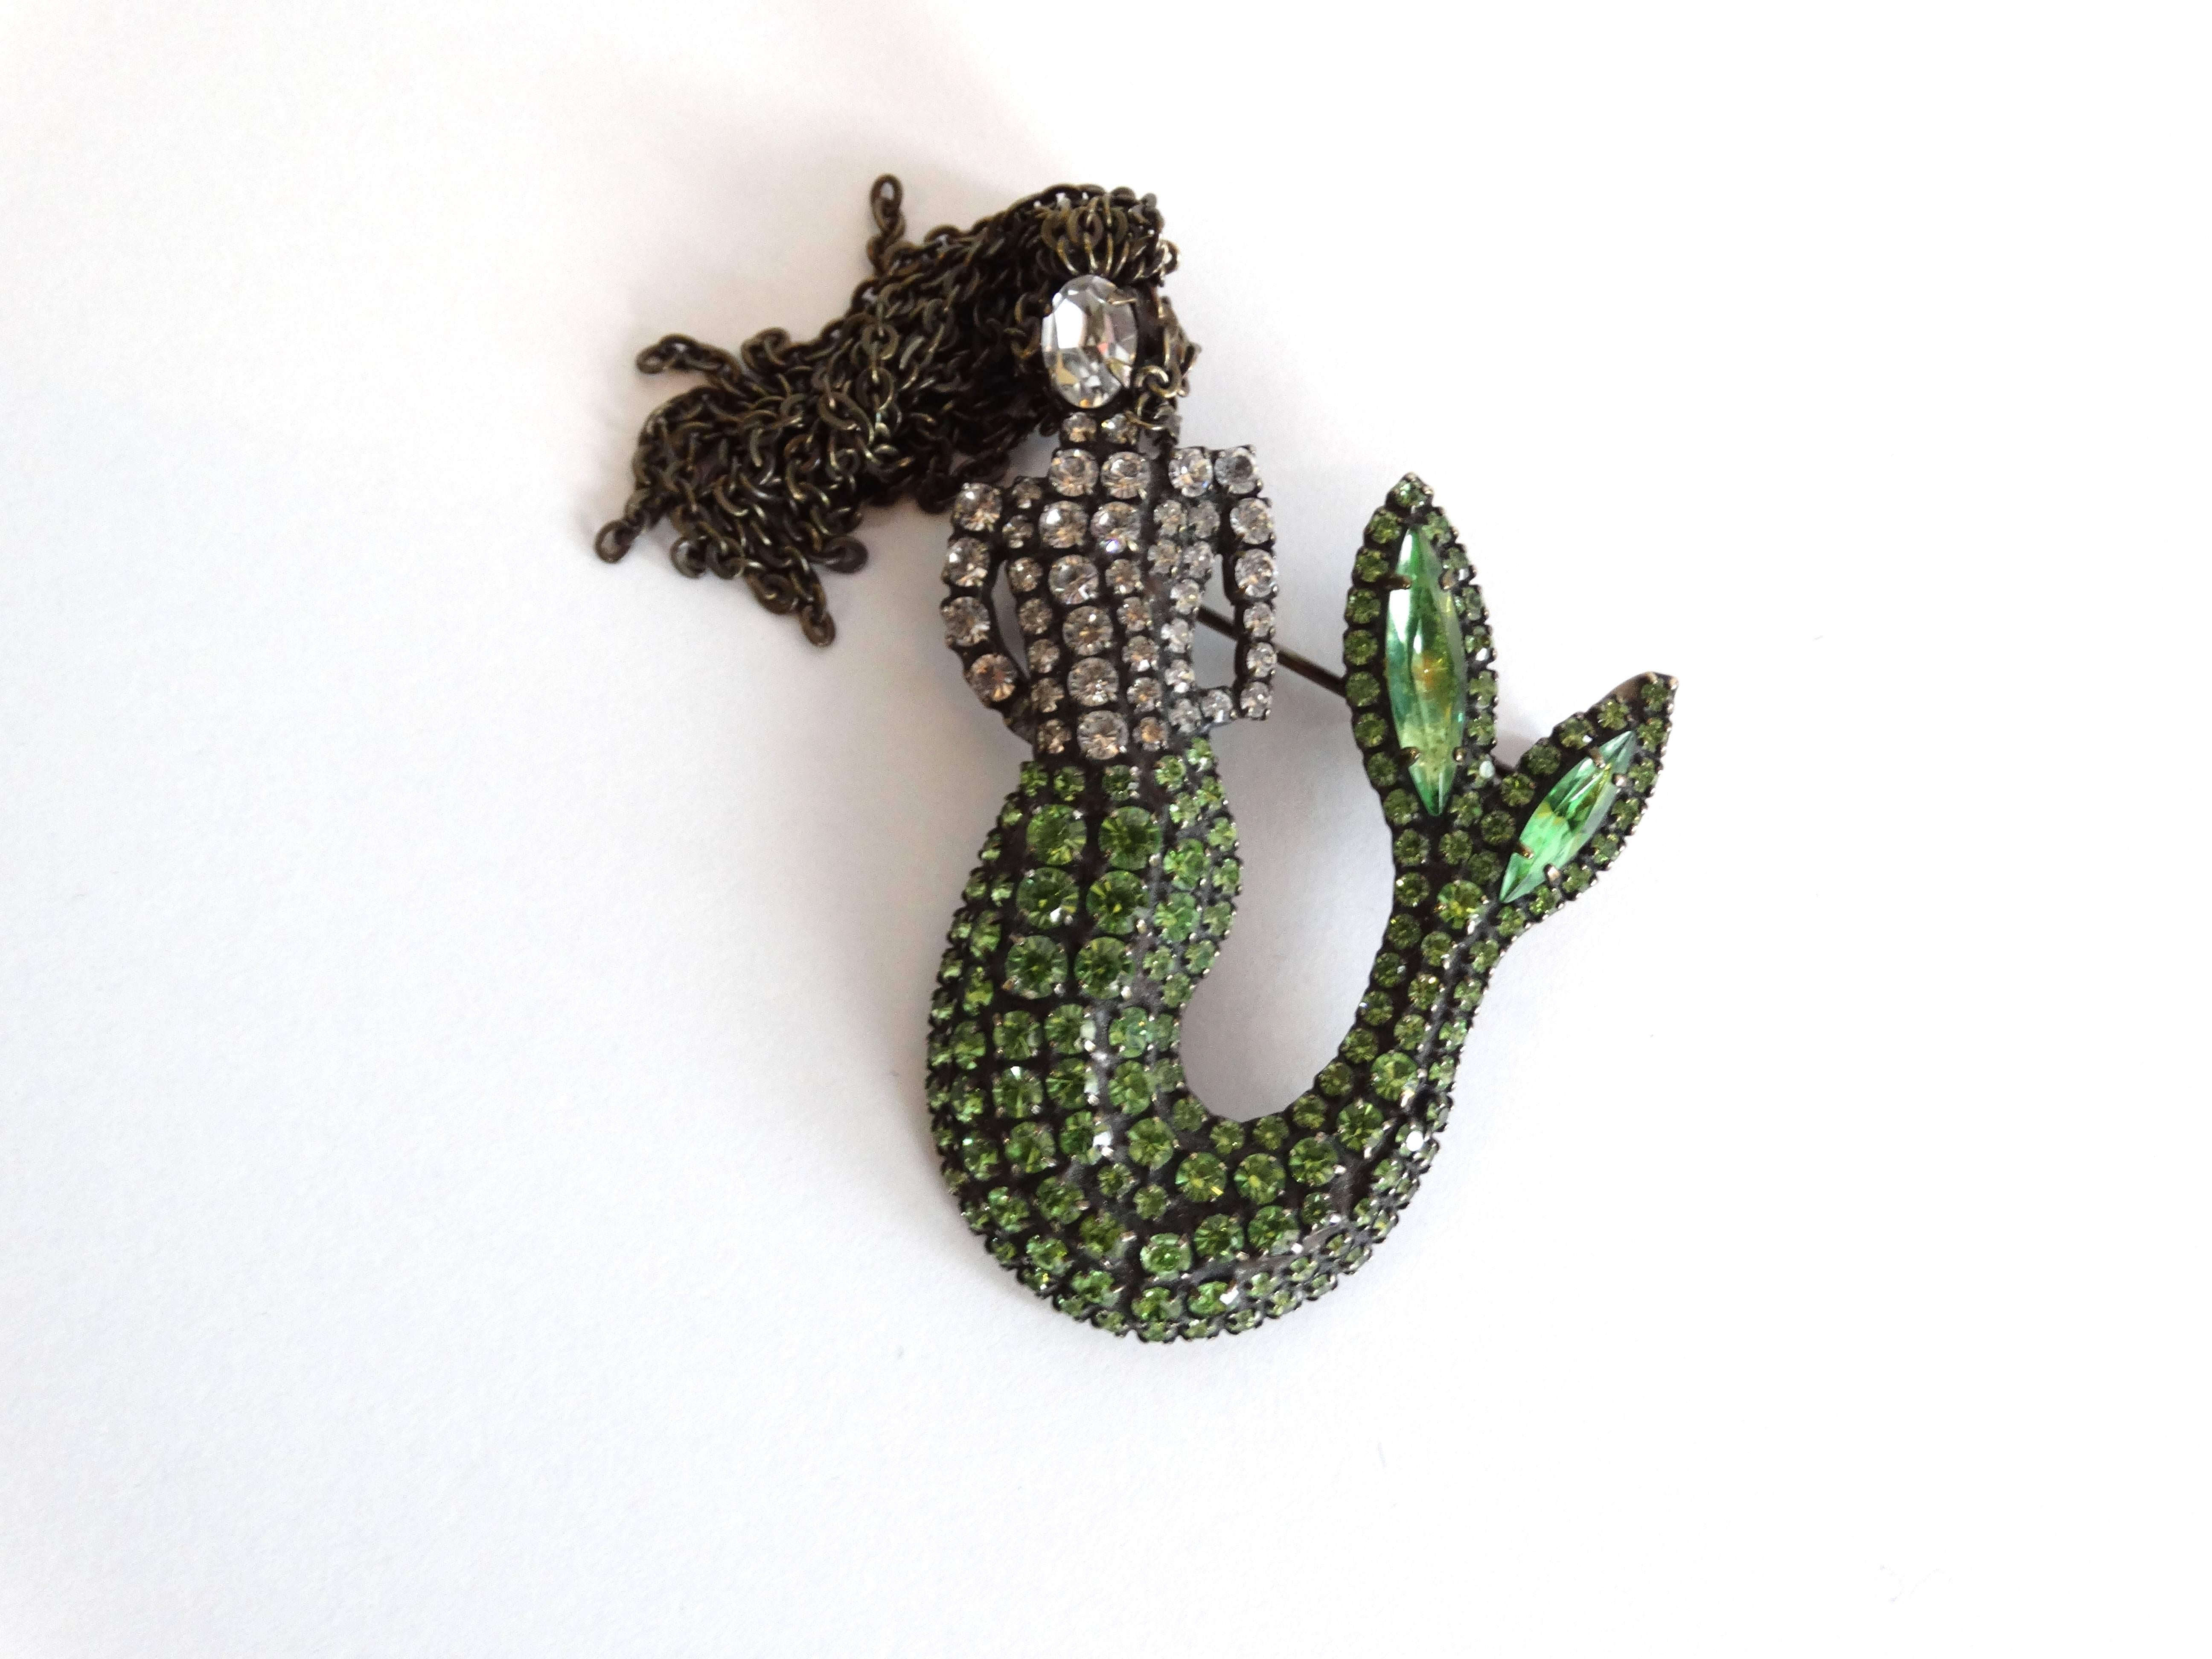 A mermaid lover's dream brooch! This alluring siren peeks out from behind her antiqued brass locks. Her upper torso is clear prong set Swarovski rhinestones and her fin is a gorgeous sea green zircon ending with 2 marquis shaped rhinestones. She